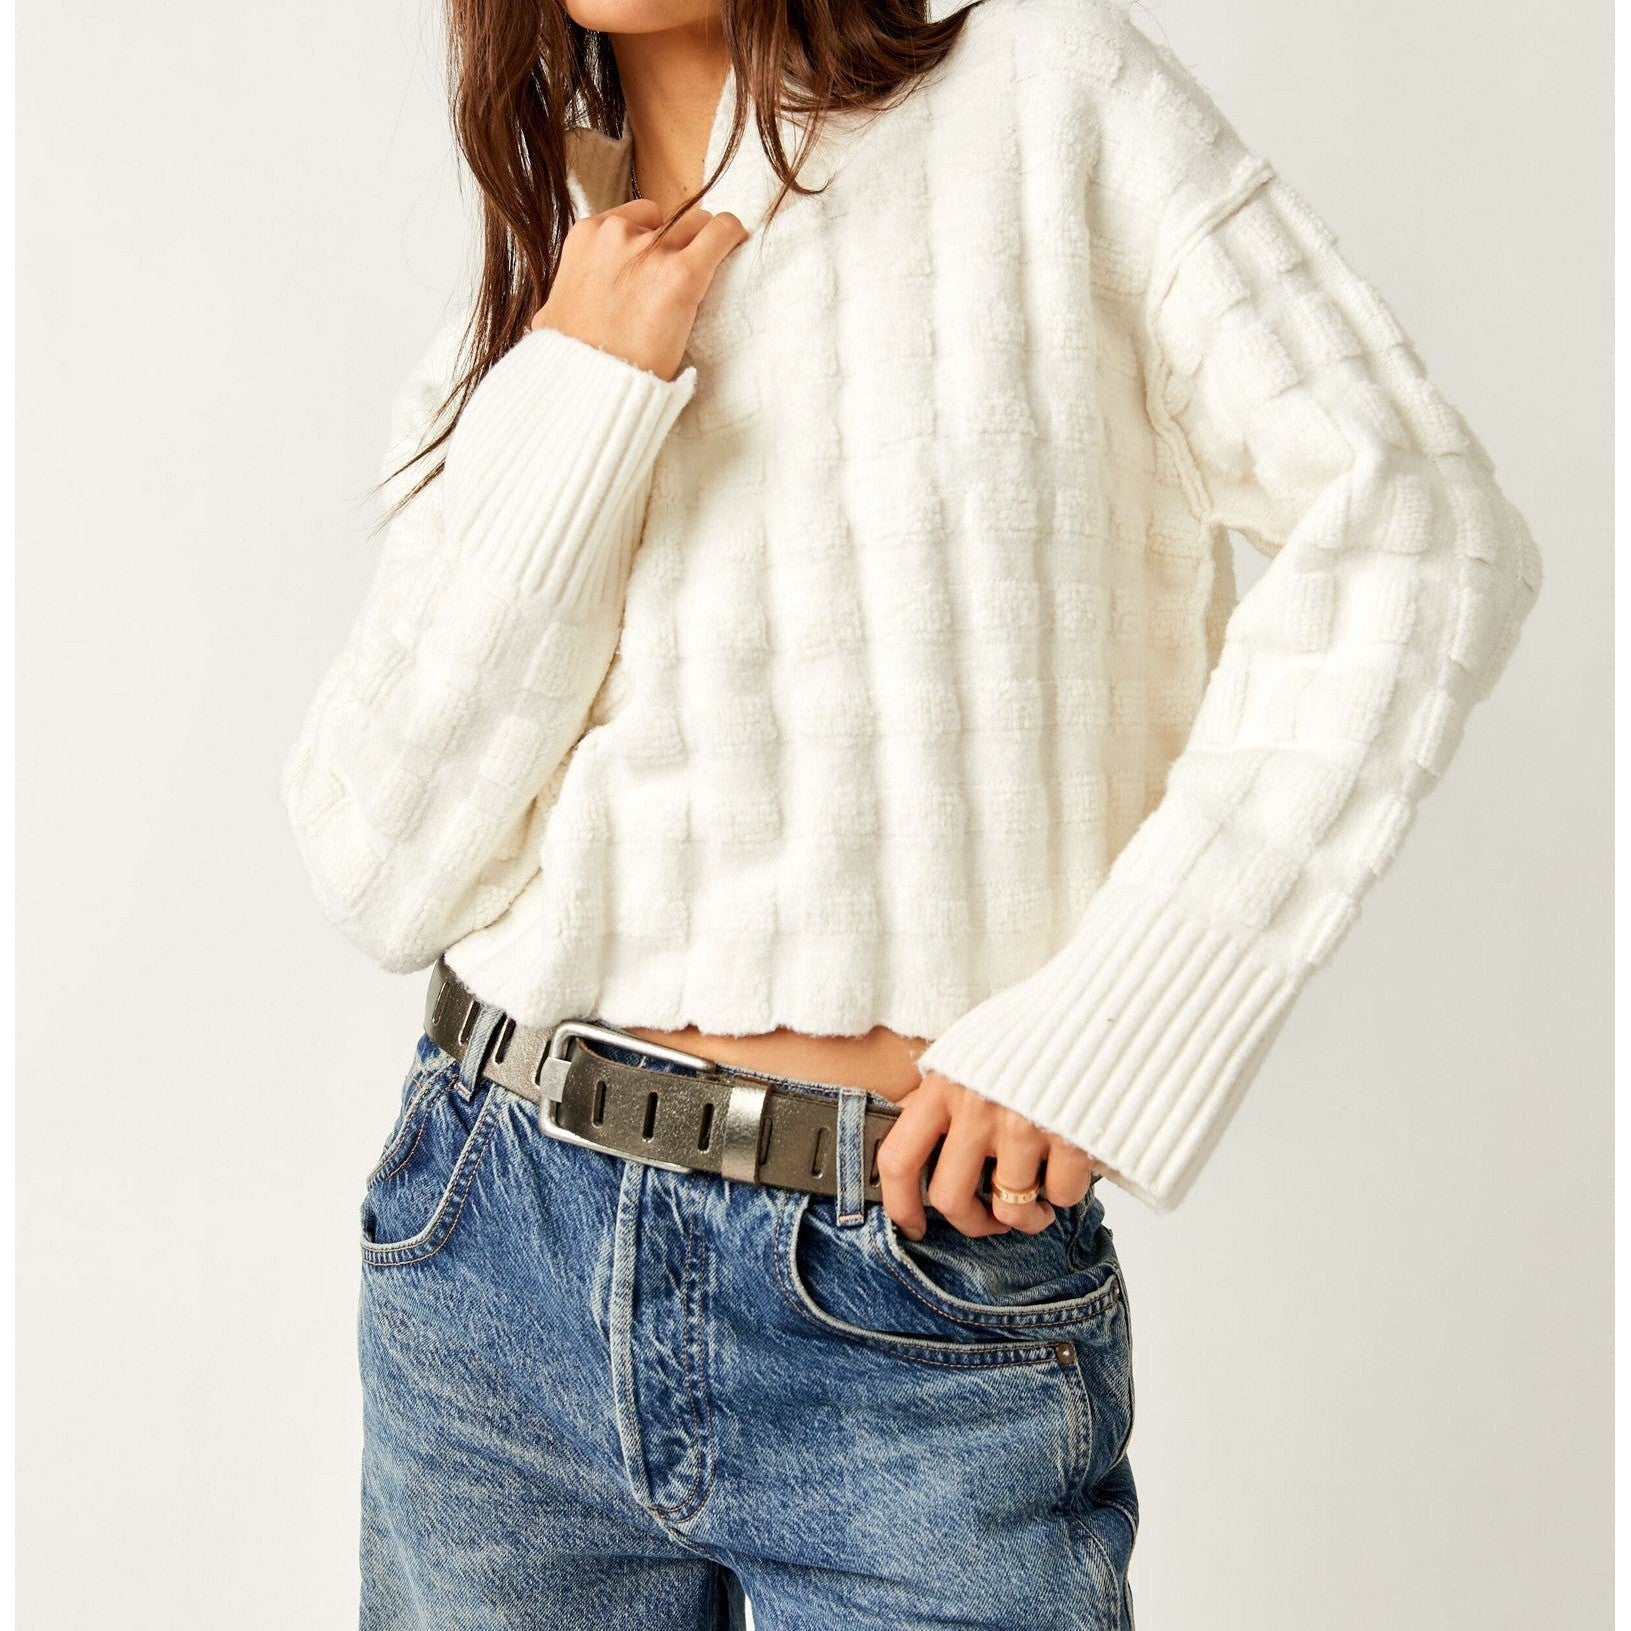 CARE FP SOUL SEARCHER MOC-Jackets & Sweaters-FREE PEOPLE-XSMALL-IVORY-Coriander